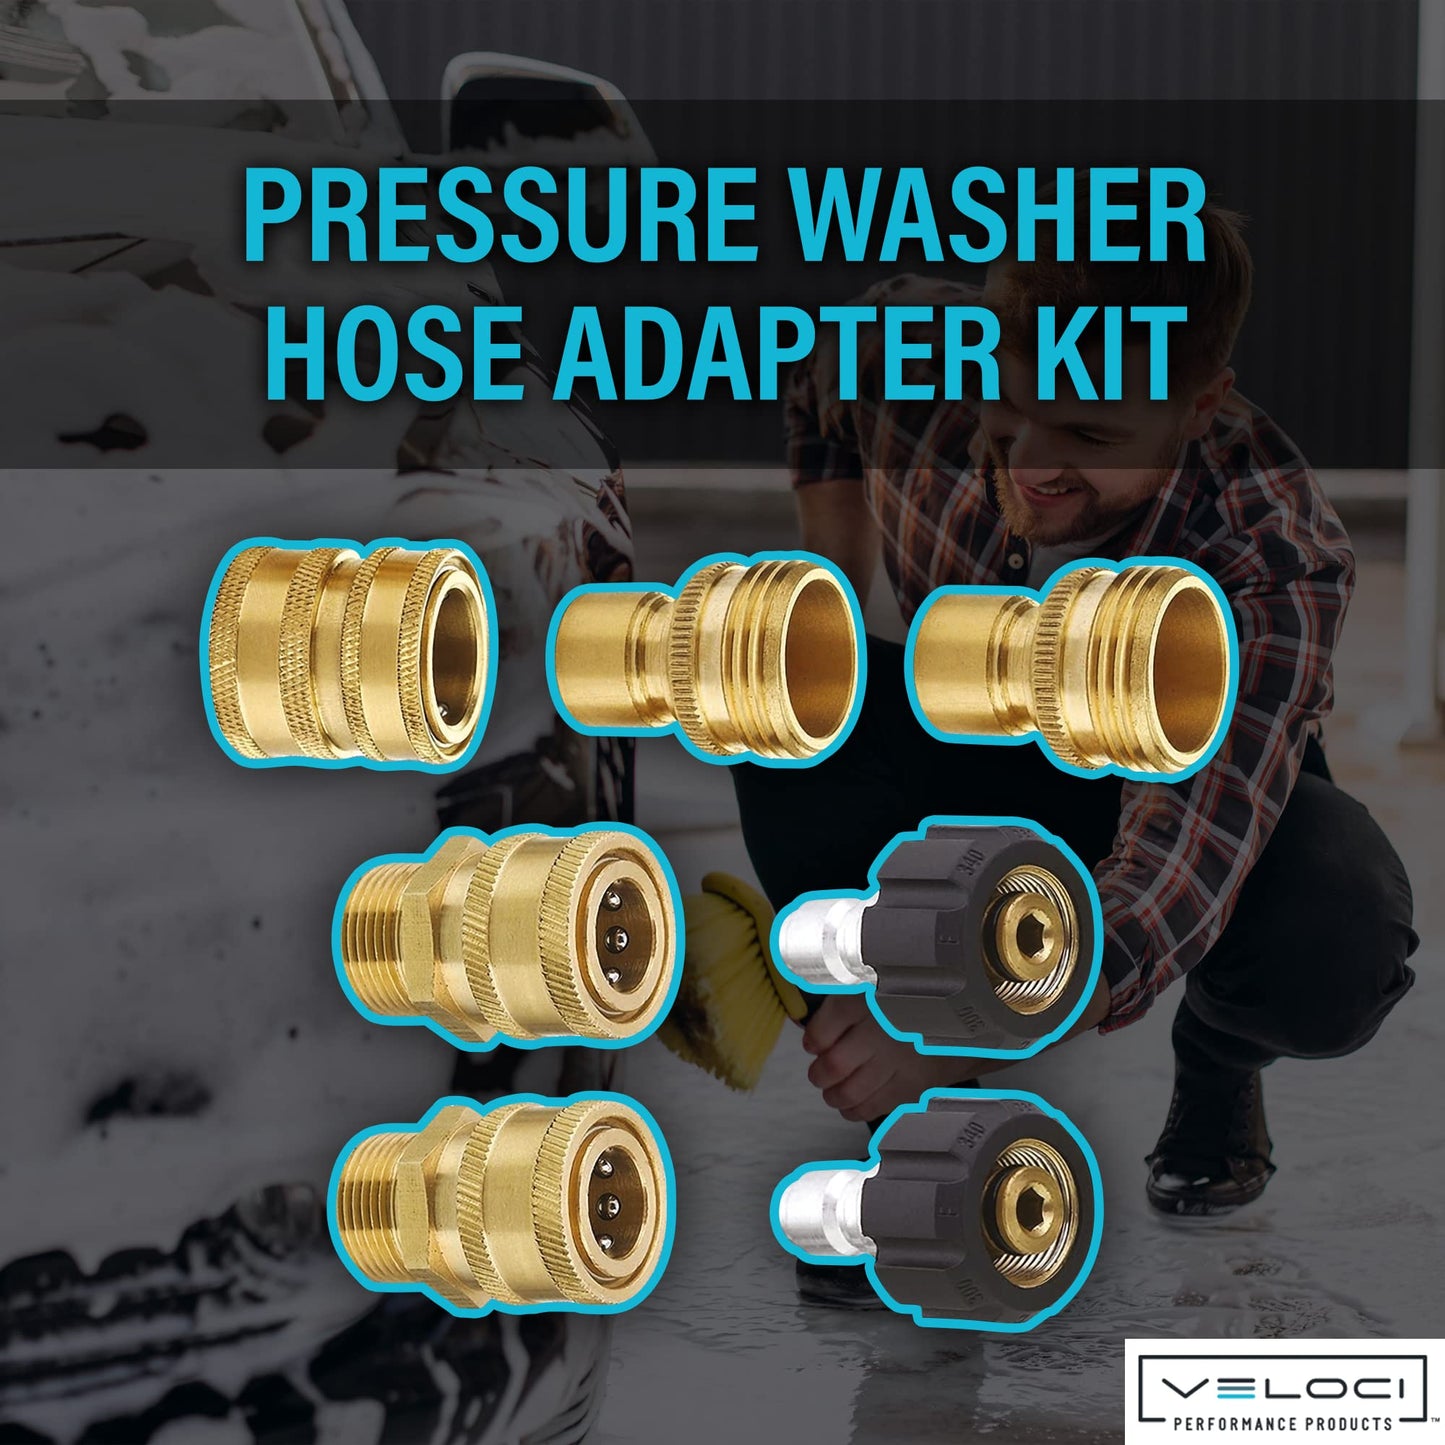 MTM Hydro Hose Adapter 7 Piece Pressure Washer Quick Connect Fittings Kit, Brass High Pressure Couplings and Connectors Adapters for Foam Cannons, Pressure Washers, and Hoses